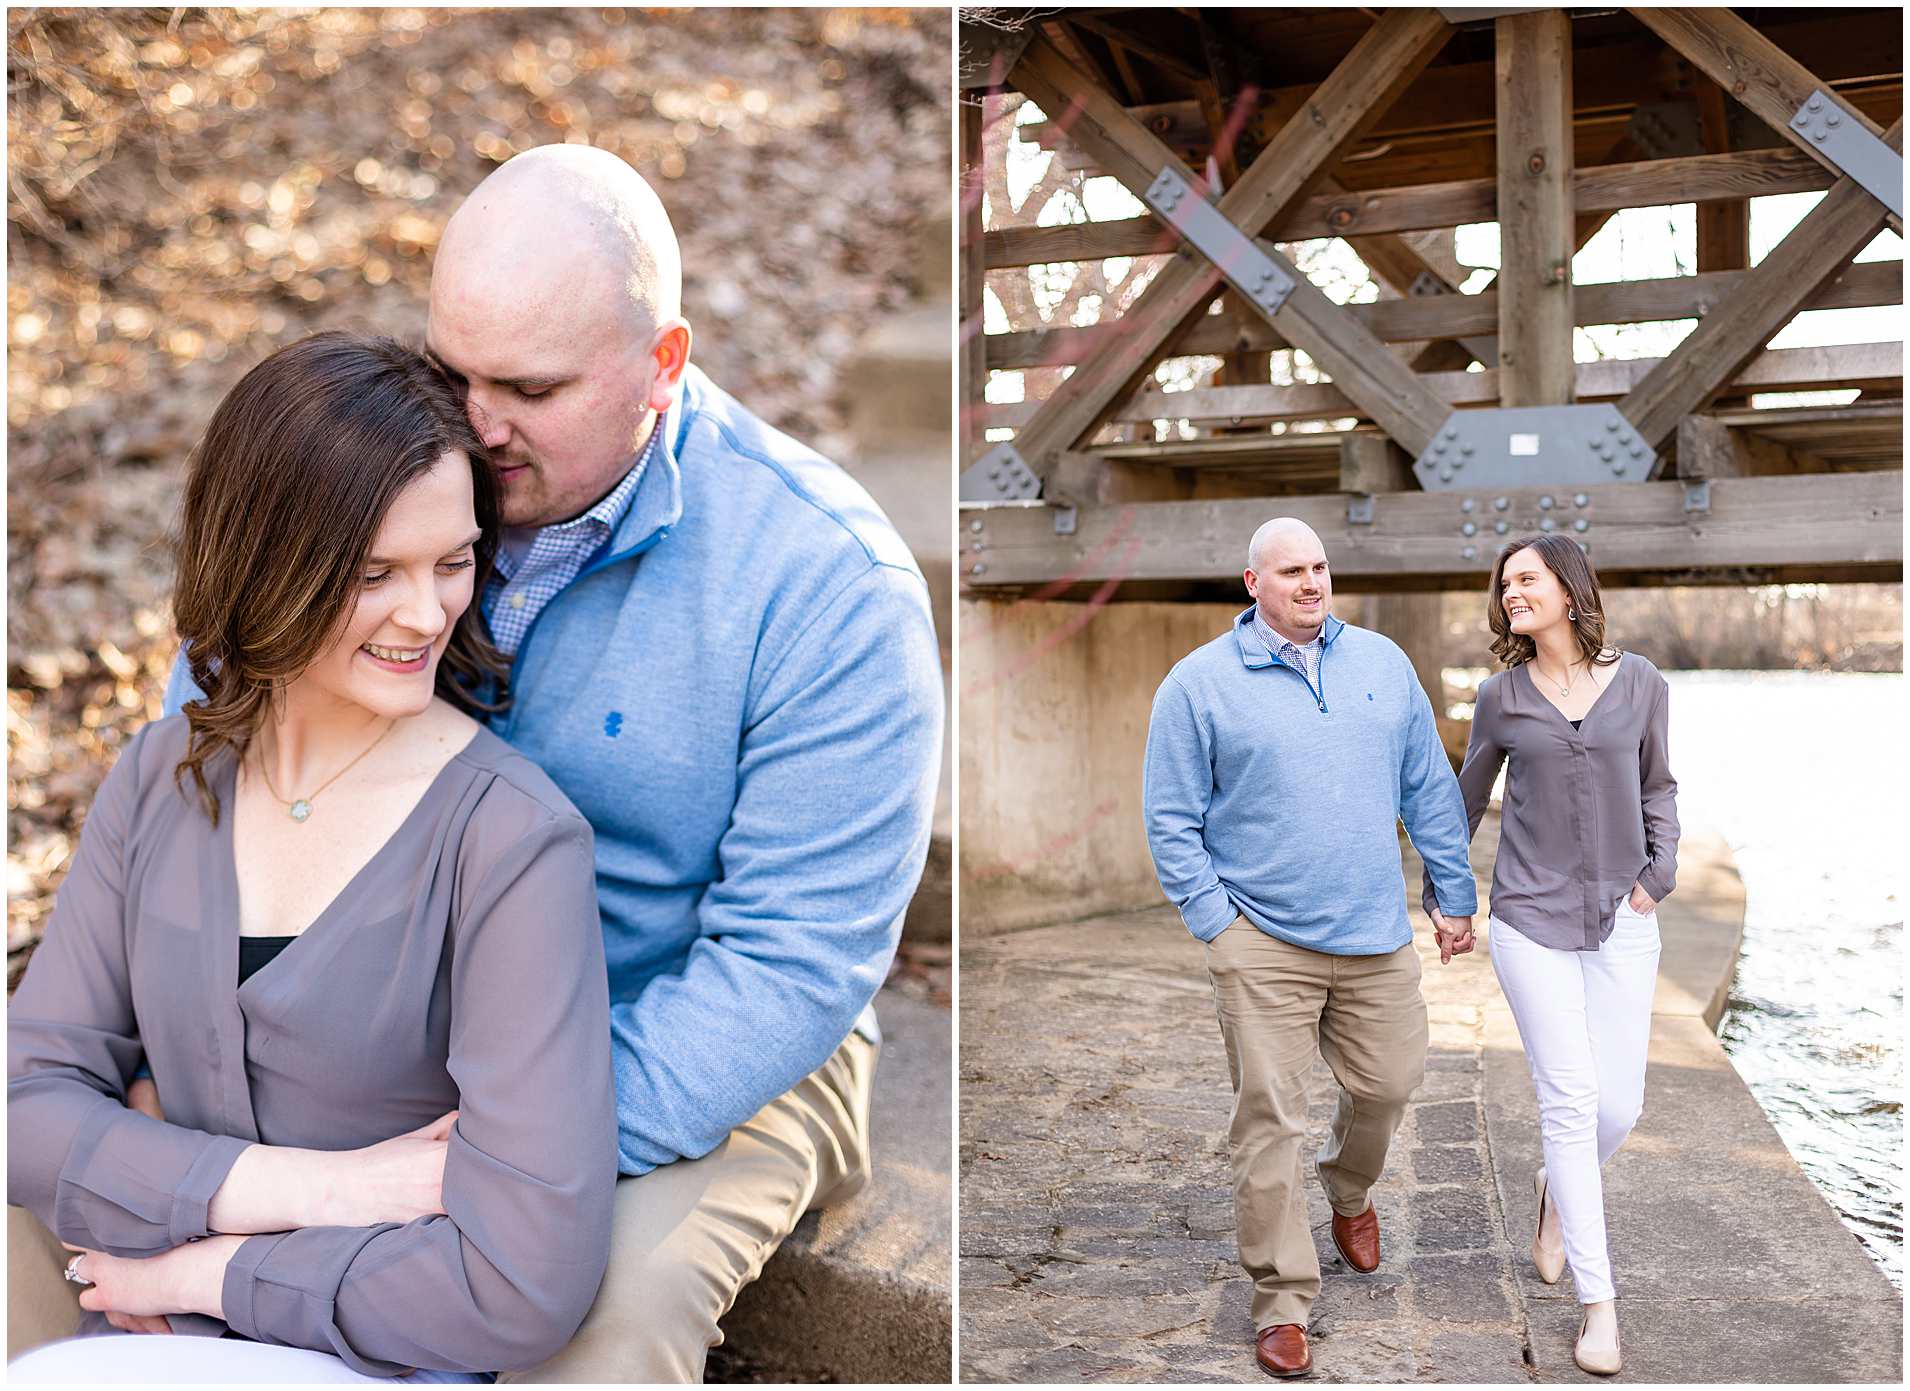 Naperville-Illinois-Spring-Engagement-Pictures-Downtown-Walking-Laughing-Pictures